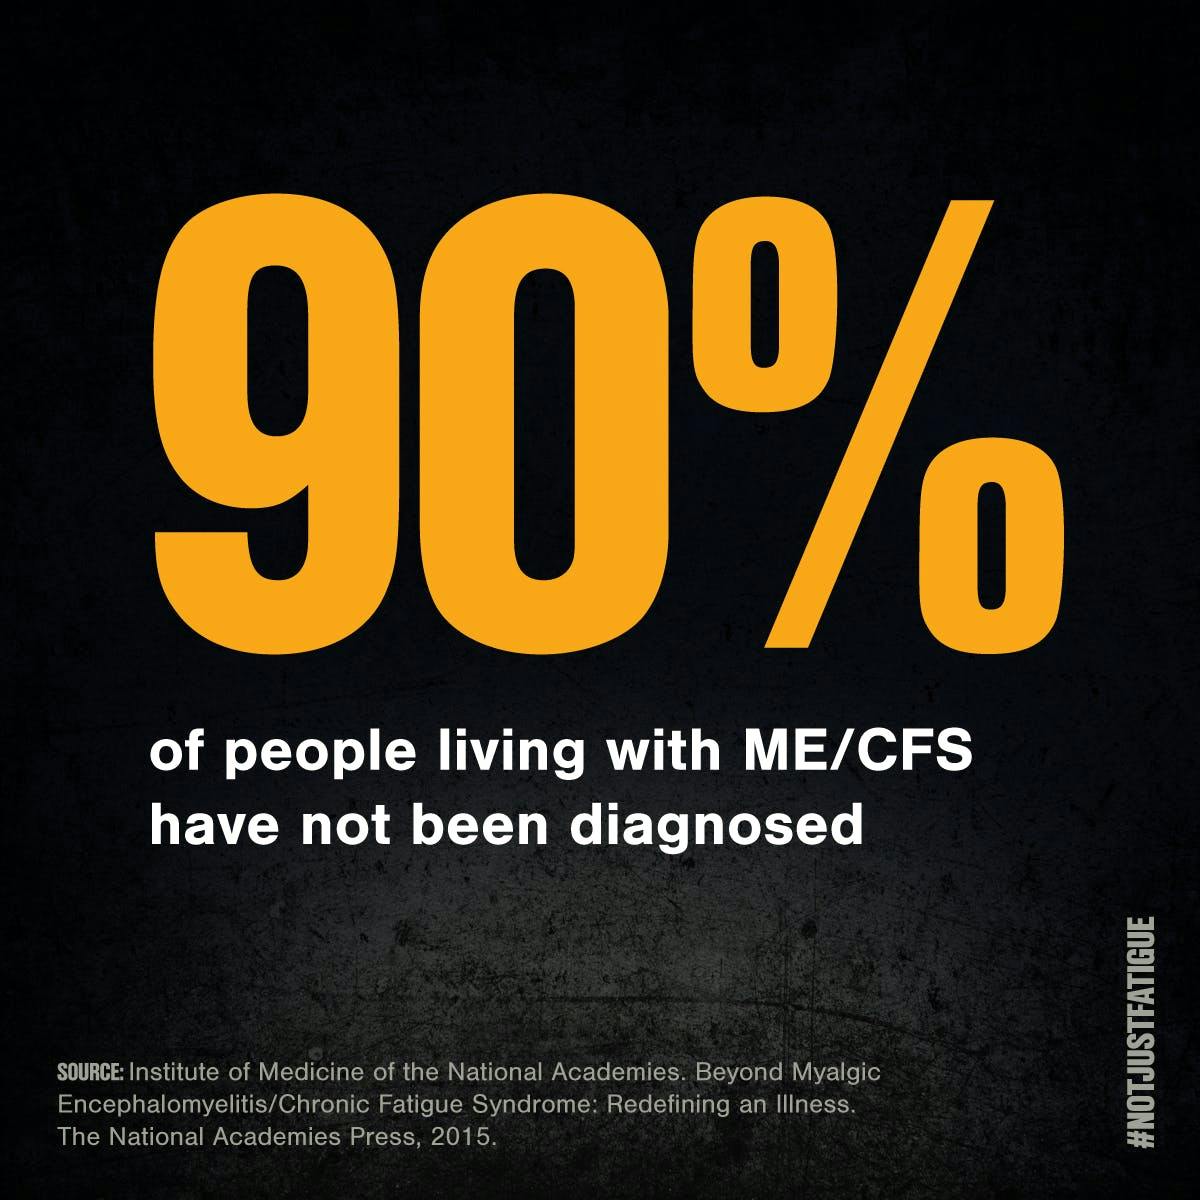 90% of people living with ME/CFS have not been diagnosed